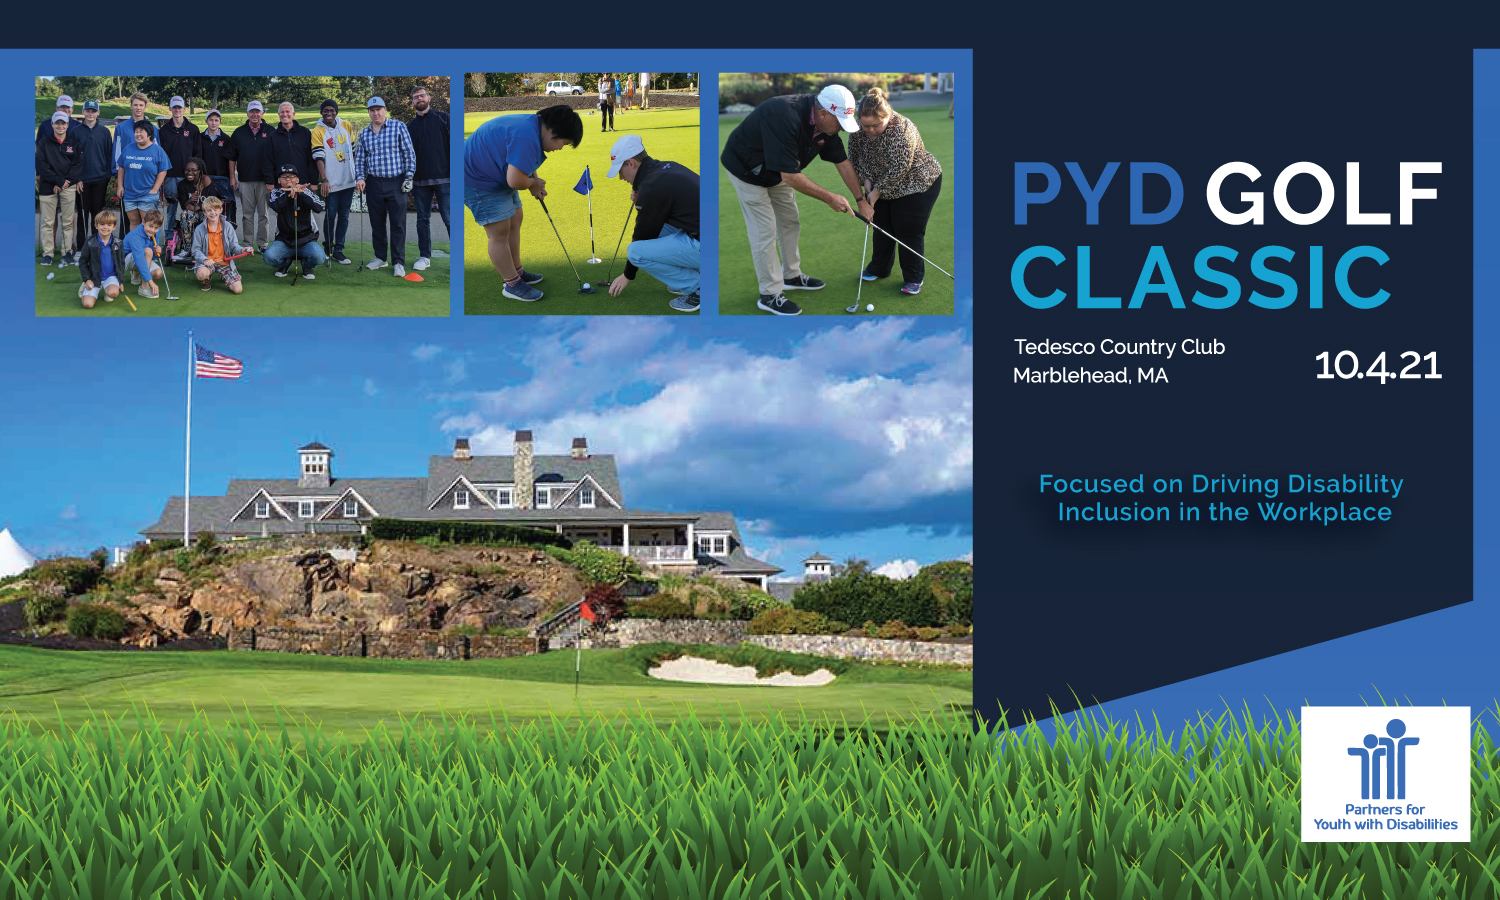 PYD Golf Classic, Tedesco Country Club, Marblehead, MA. October 4th, 2021